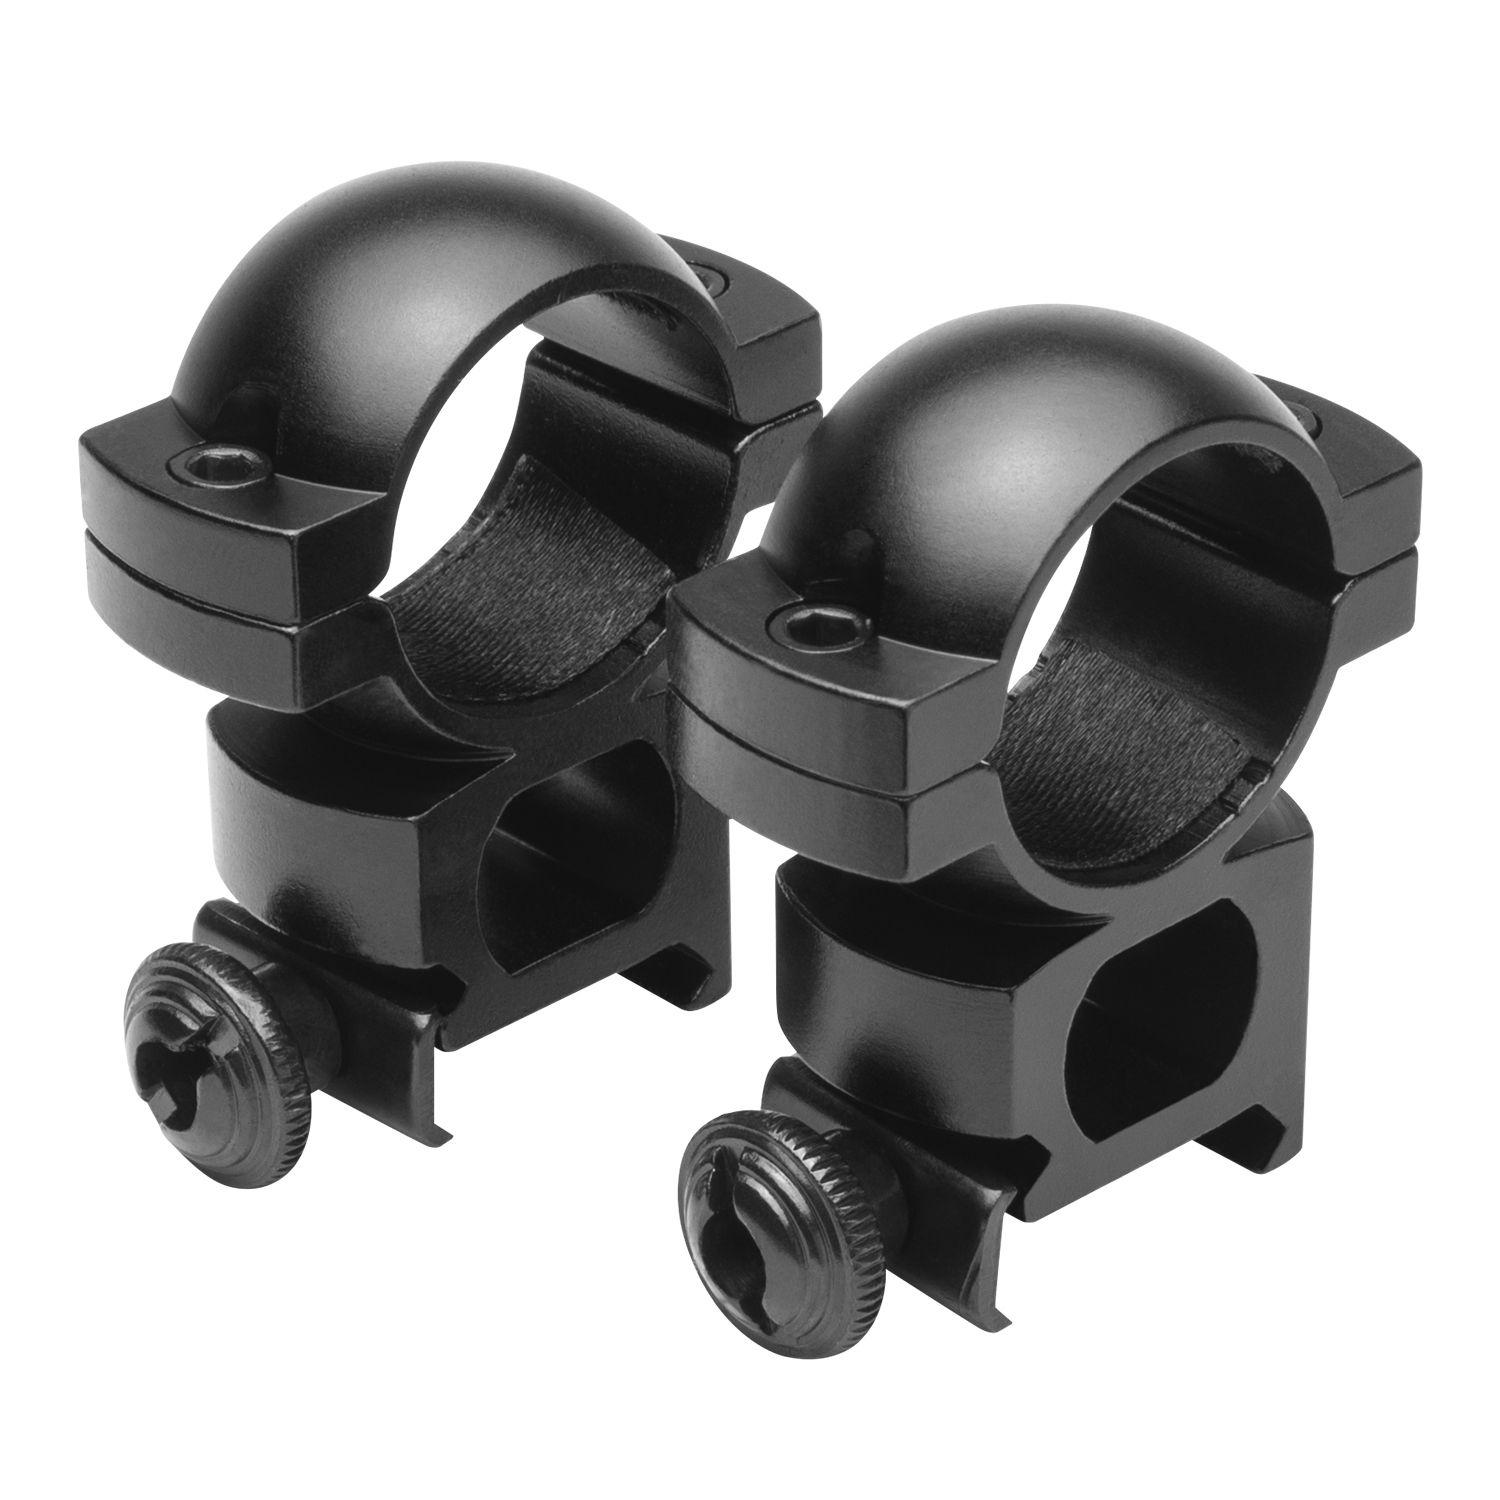 Enhance your firearm with the 1 Inch Weaver Rings - a durable black mounting solution from Ncstar. Designed for Weaver and Picatinny type rails, these rings are sold as a pair for secure optics attachment.